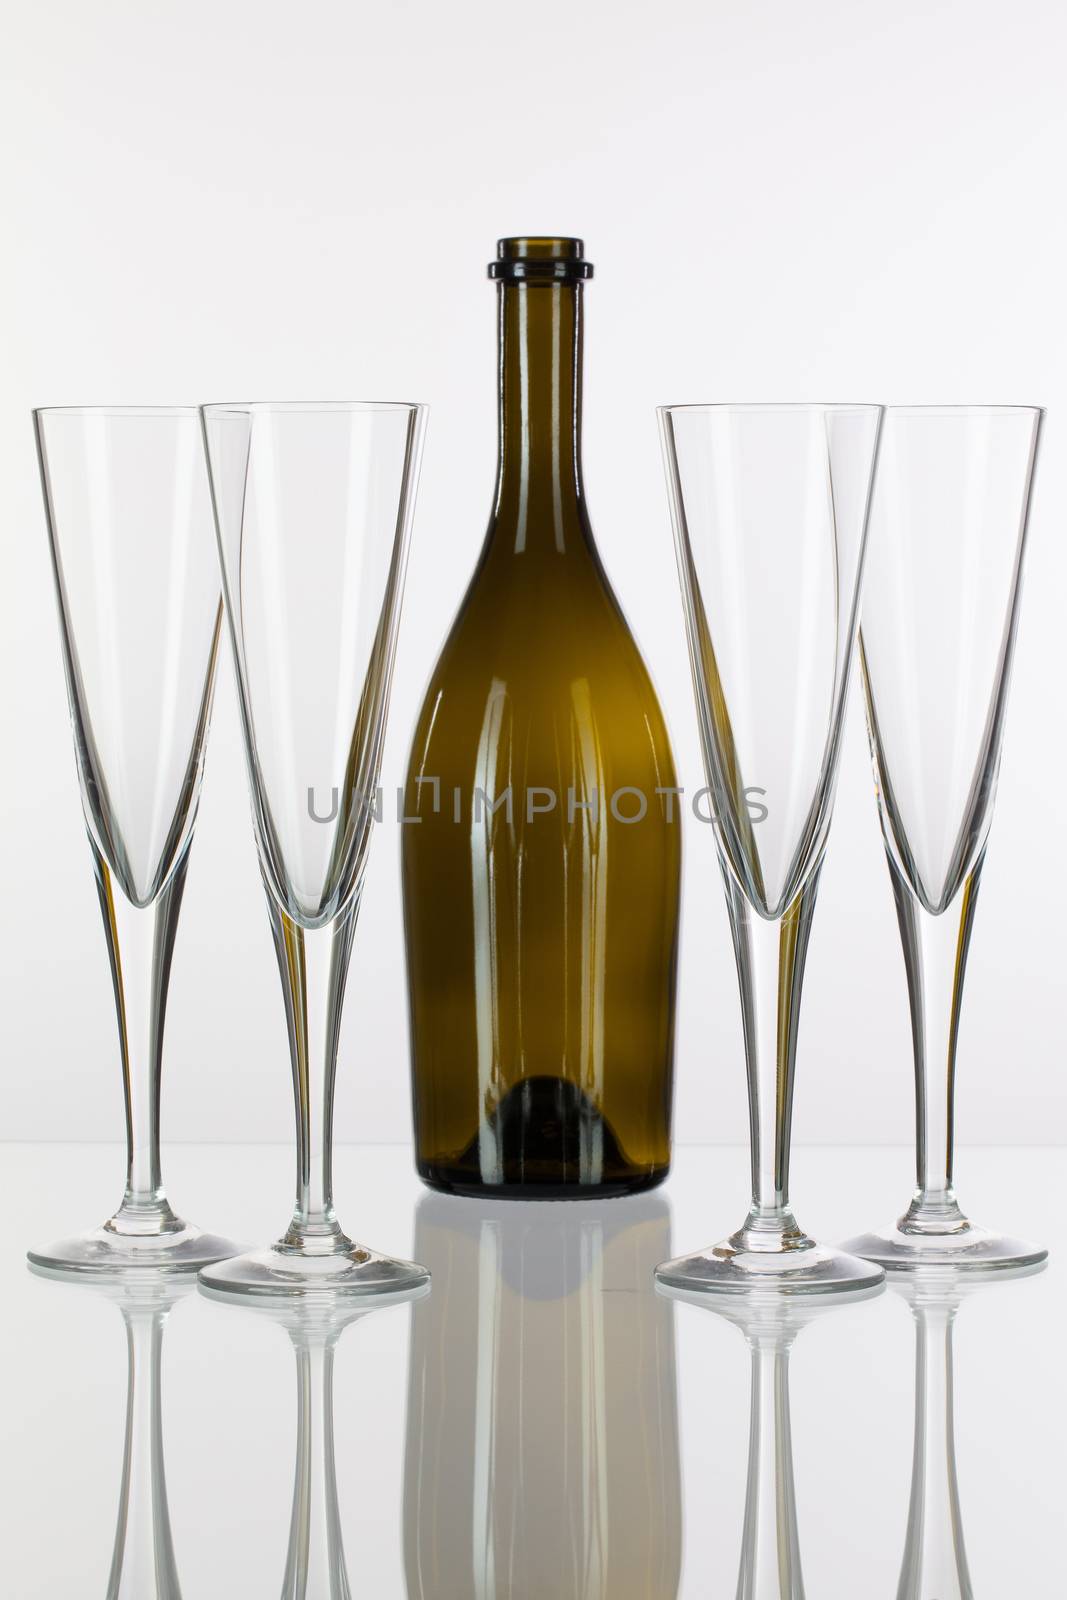 Four  champagne glasses on a glass plate